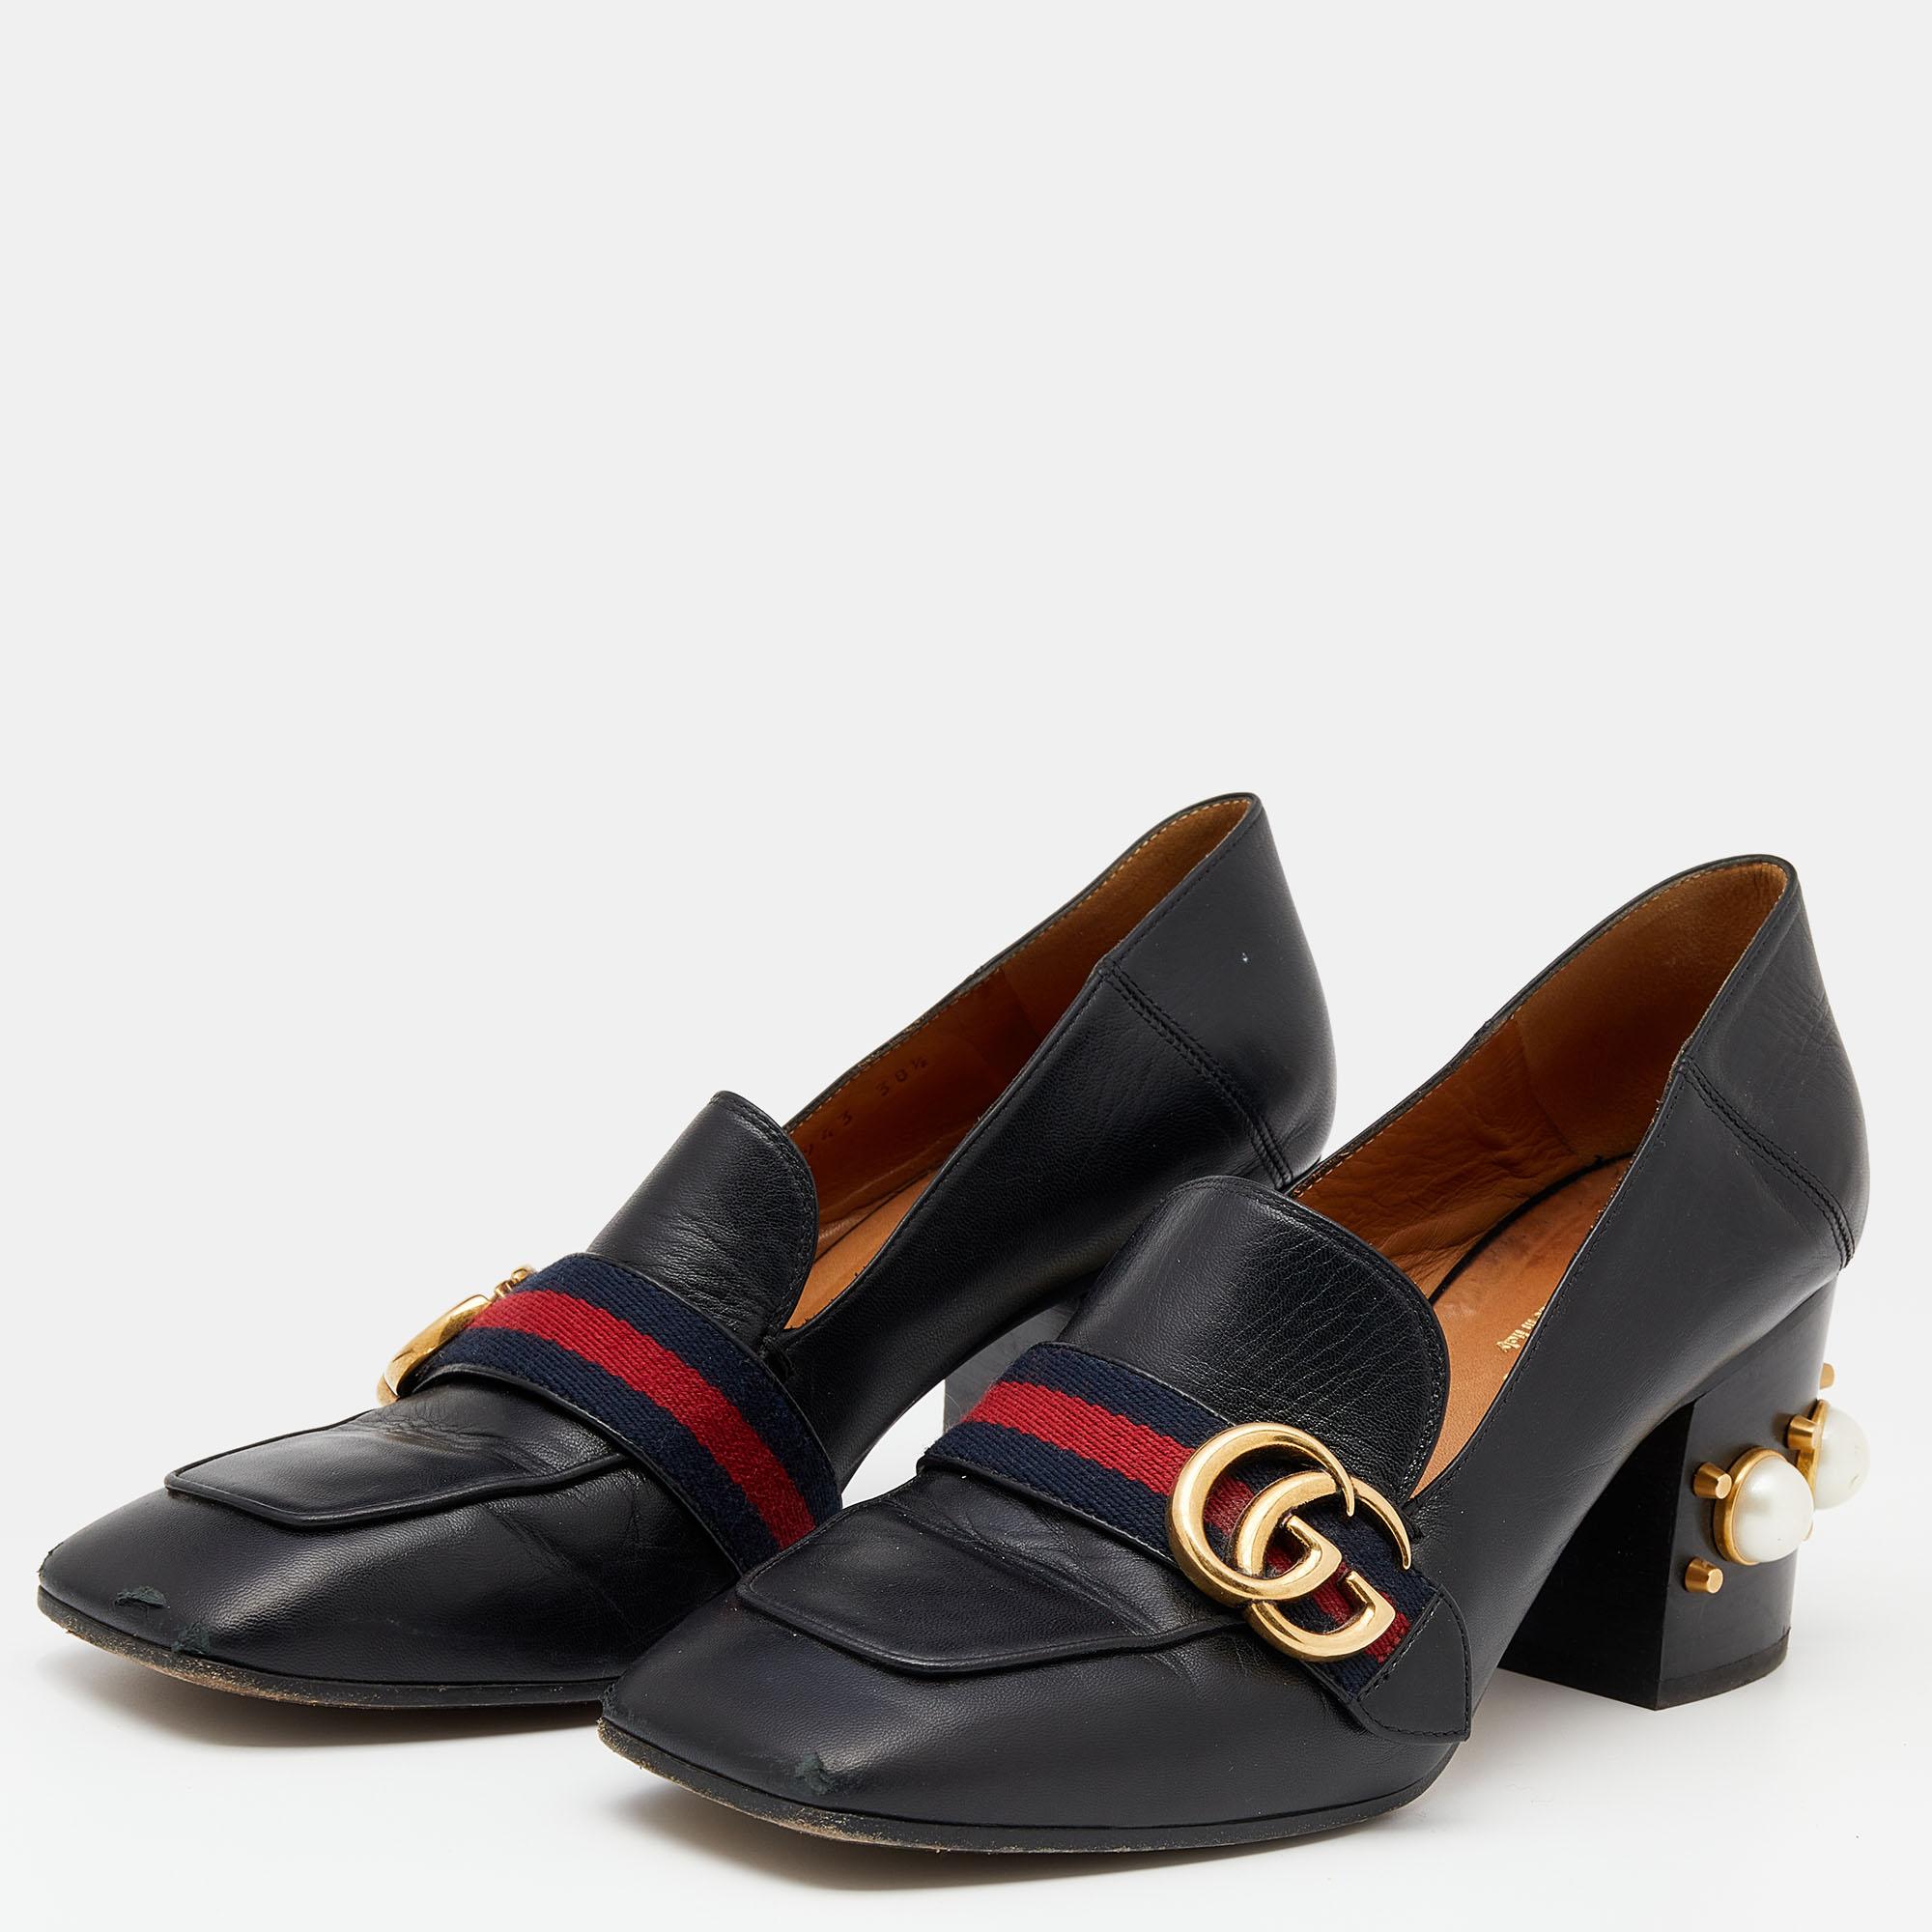 Brimming with signature details, these Gucci loafer leather pumps will certainly bring you a fashionable look. The uppers have a gold-tone GG motif and the Web trim while the heels are decorated with faux pearls and studs. Revamp your footwear